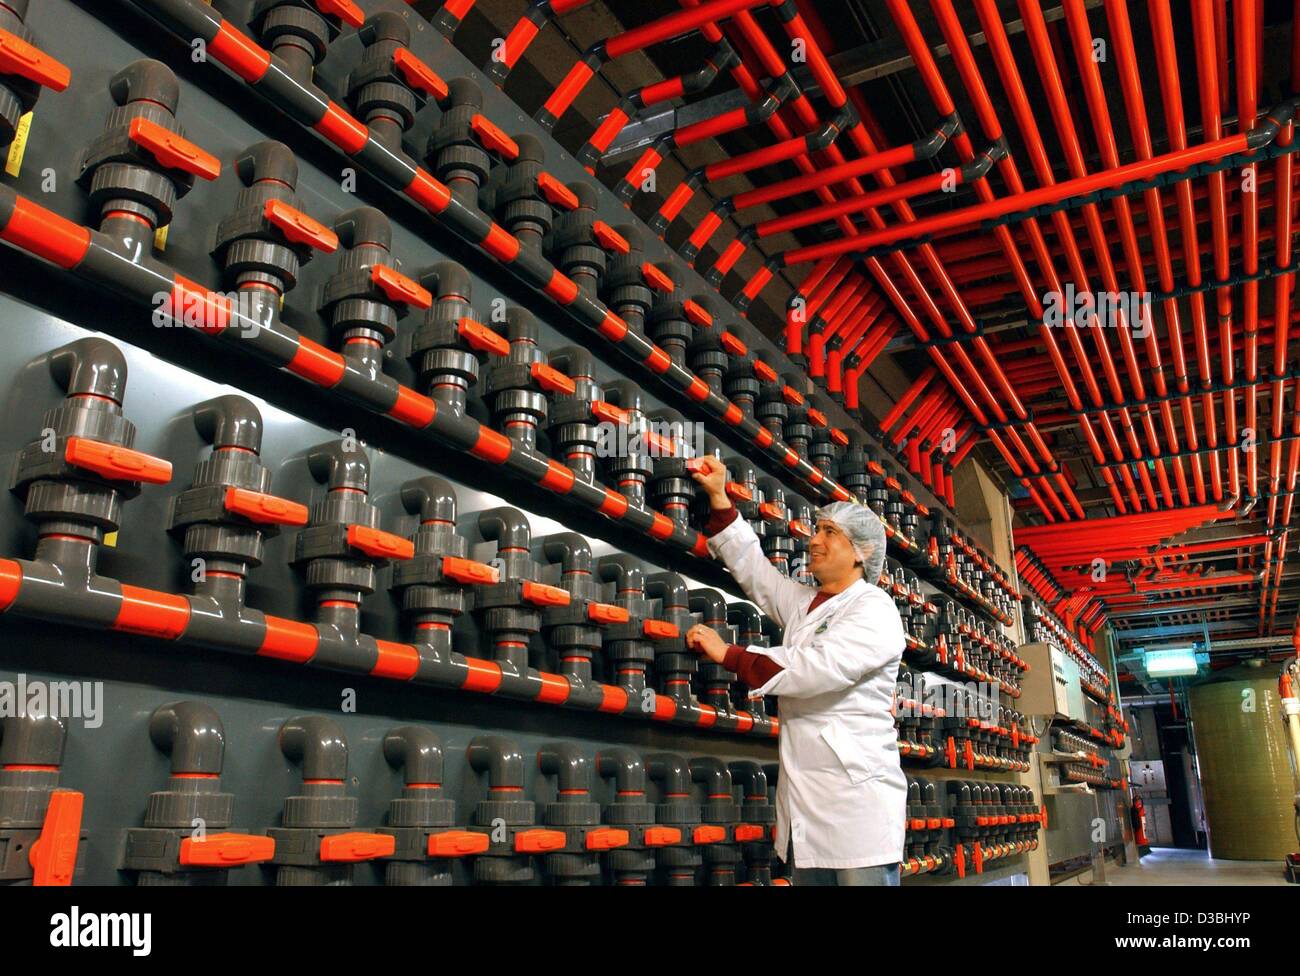 (dpa) - An employee of Carl Kuehne KG is fixing a valve at the vinegar filtering plant, Hagenow, Germany, 3 April 2003. With a yearly output of 38 million litres of vinegar, the factory is the most productive one in Germany, says Kuehne. Stock Photo